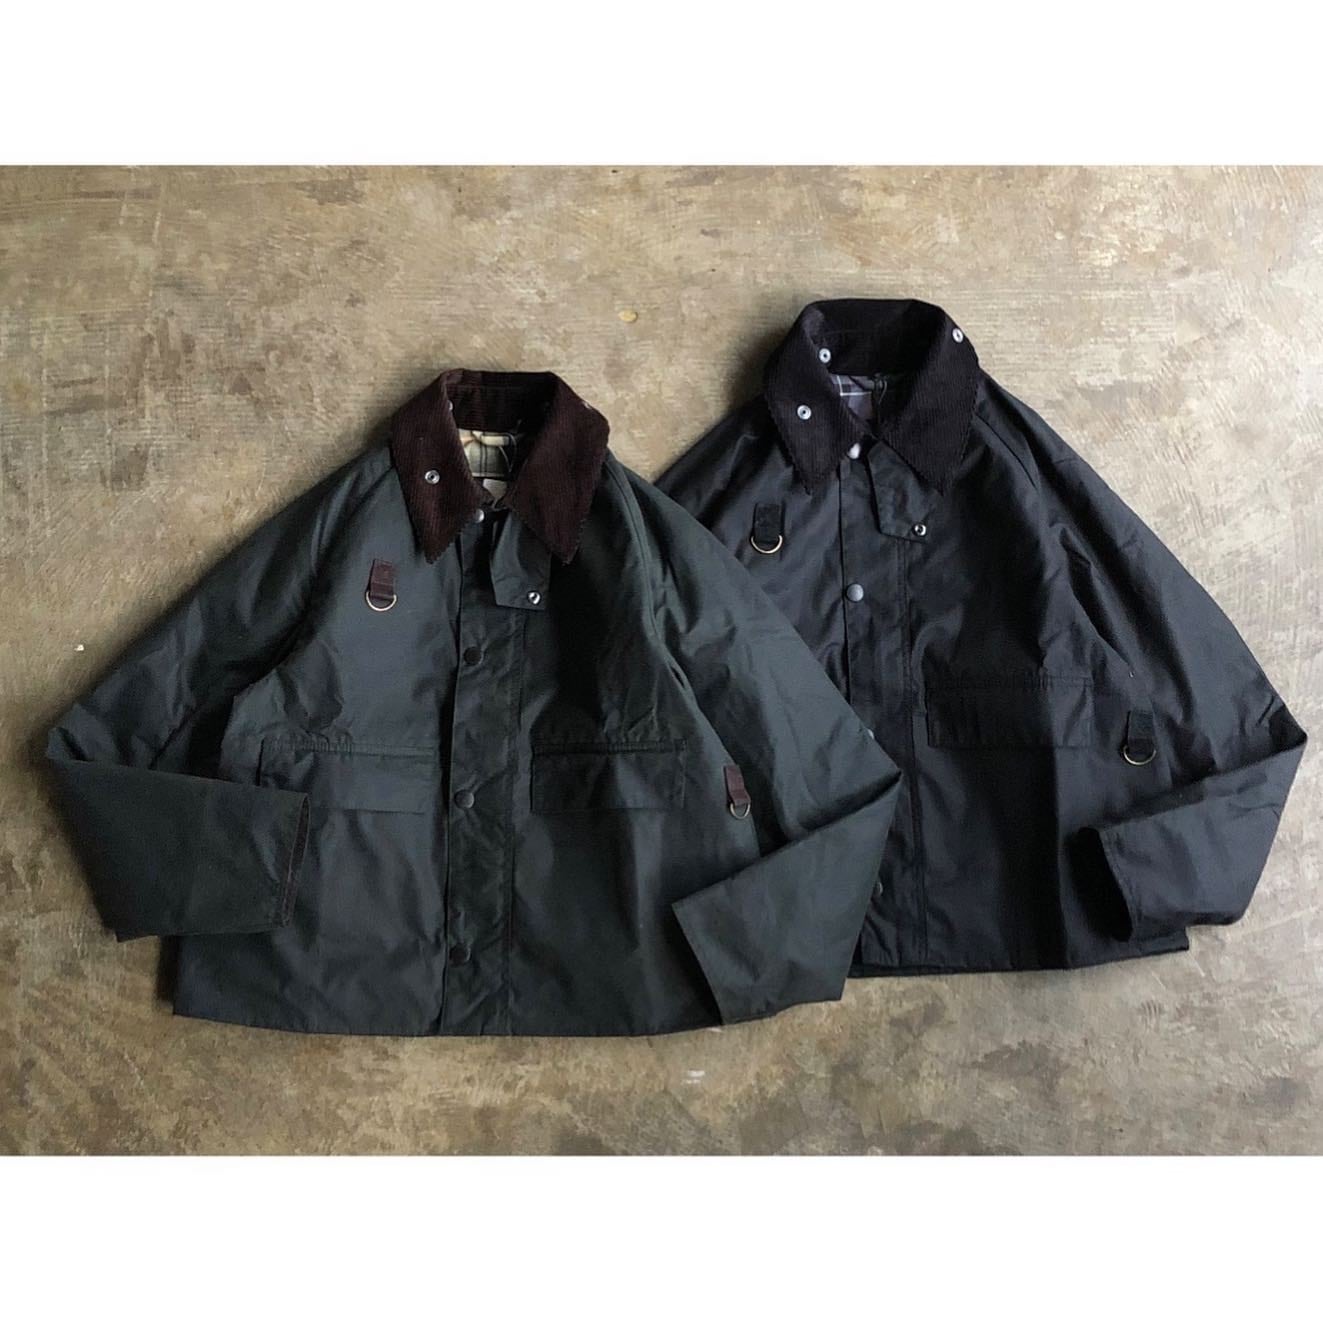 Barbour(バブアー) 『SPEY』Waxed Cotton Jacket | AUTHENTIC Life Store